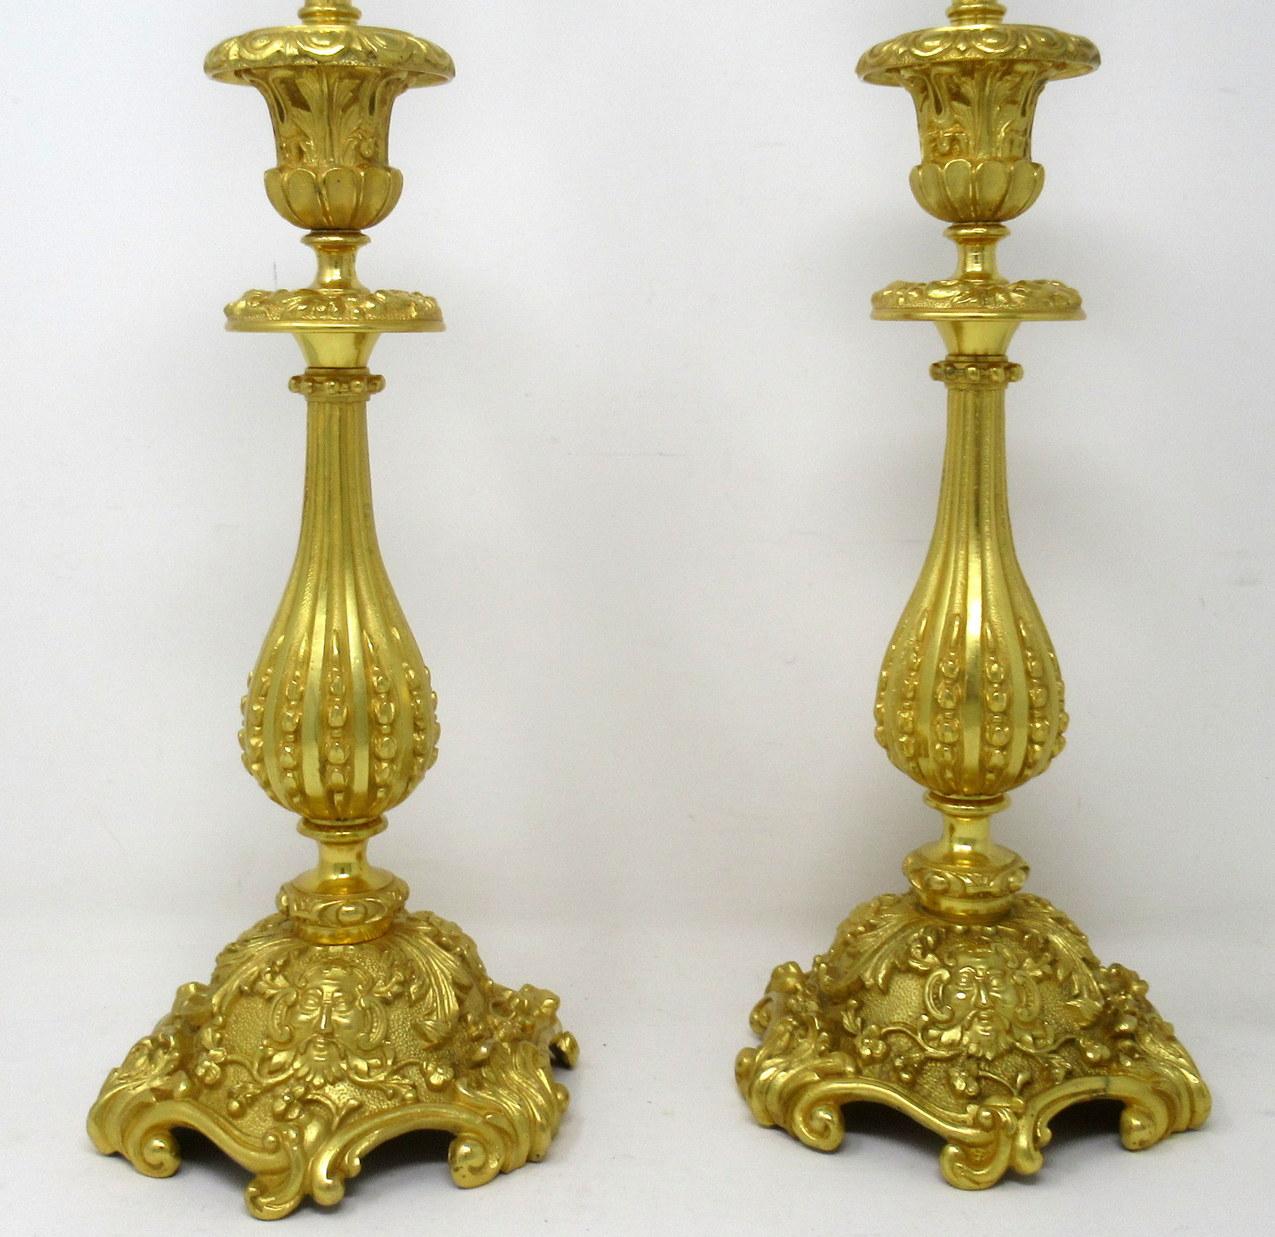 Early Victorian Antique Pair of French Doré Bronze Neoclassical Ormolu Gilt Candlestick Lamps